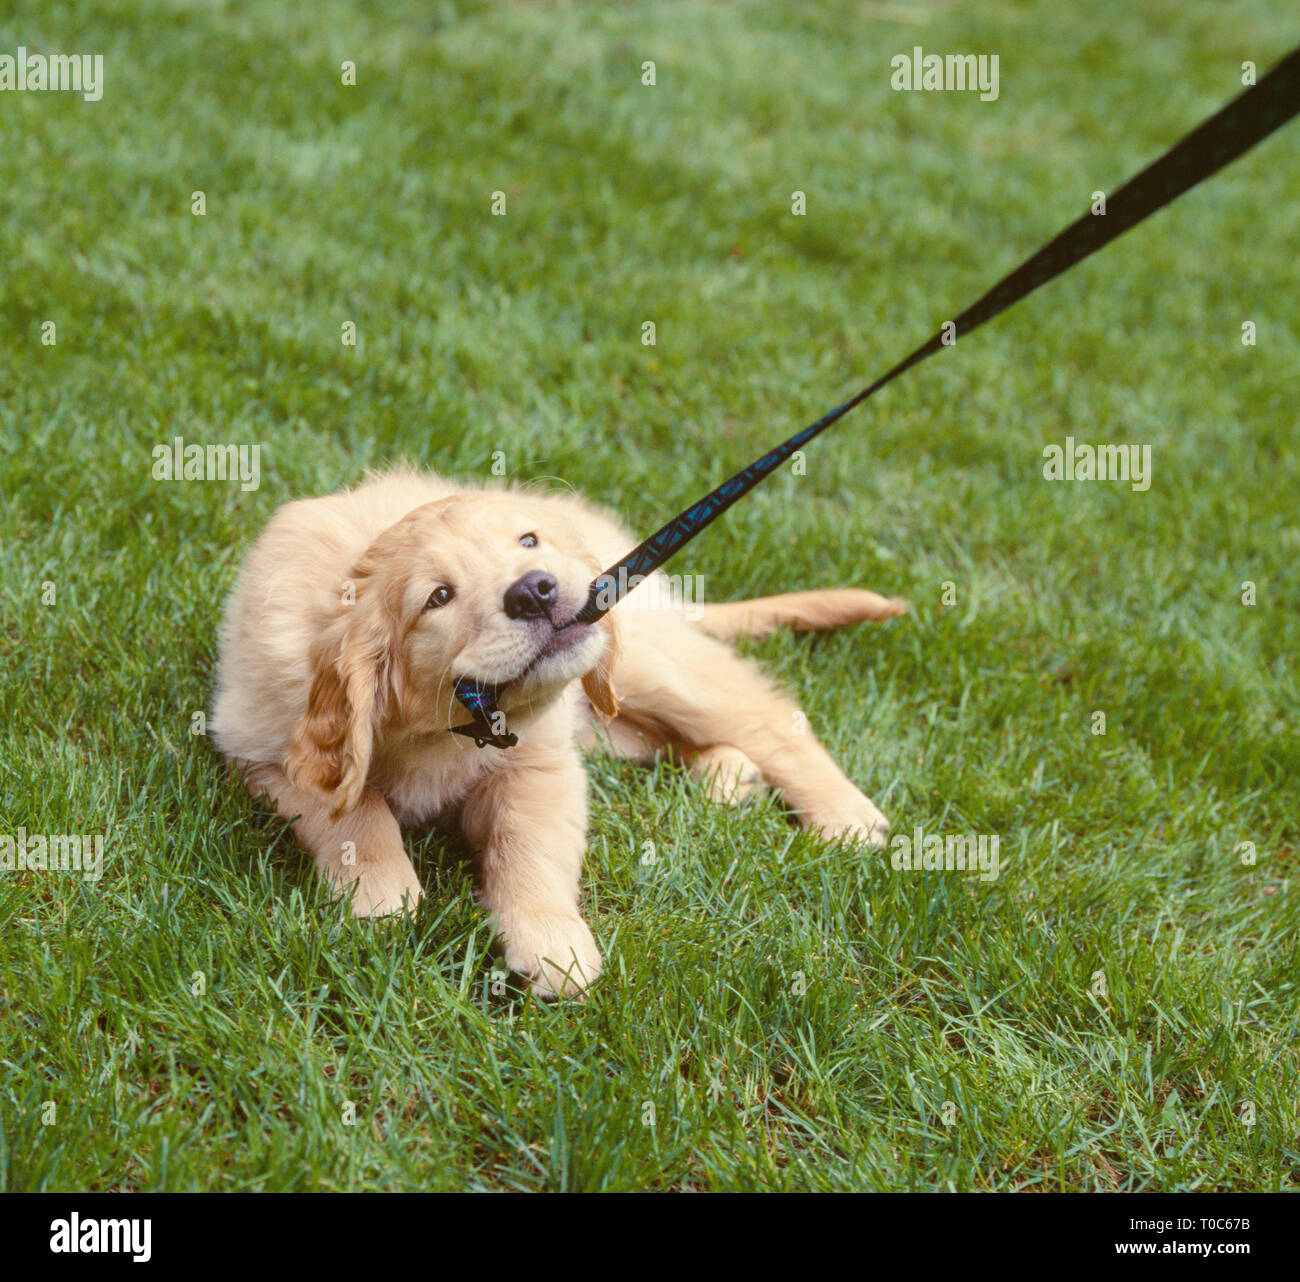 Golden lab labrador retriever dog chewing pulling on leash. Cute,  mischievous, funny, young puppy. Bad pet behavior animal training concept  Stock Photo - Alamy